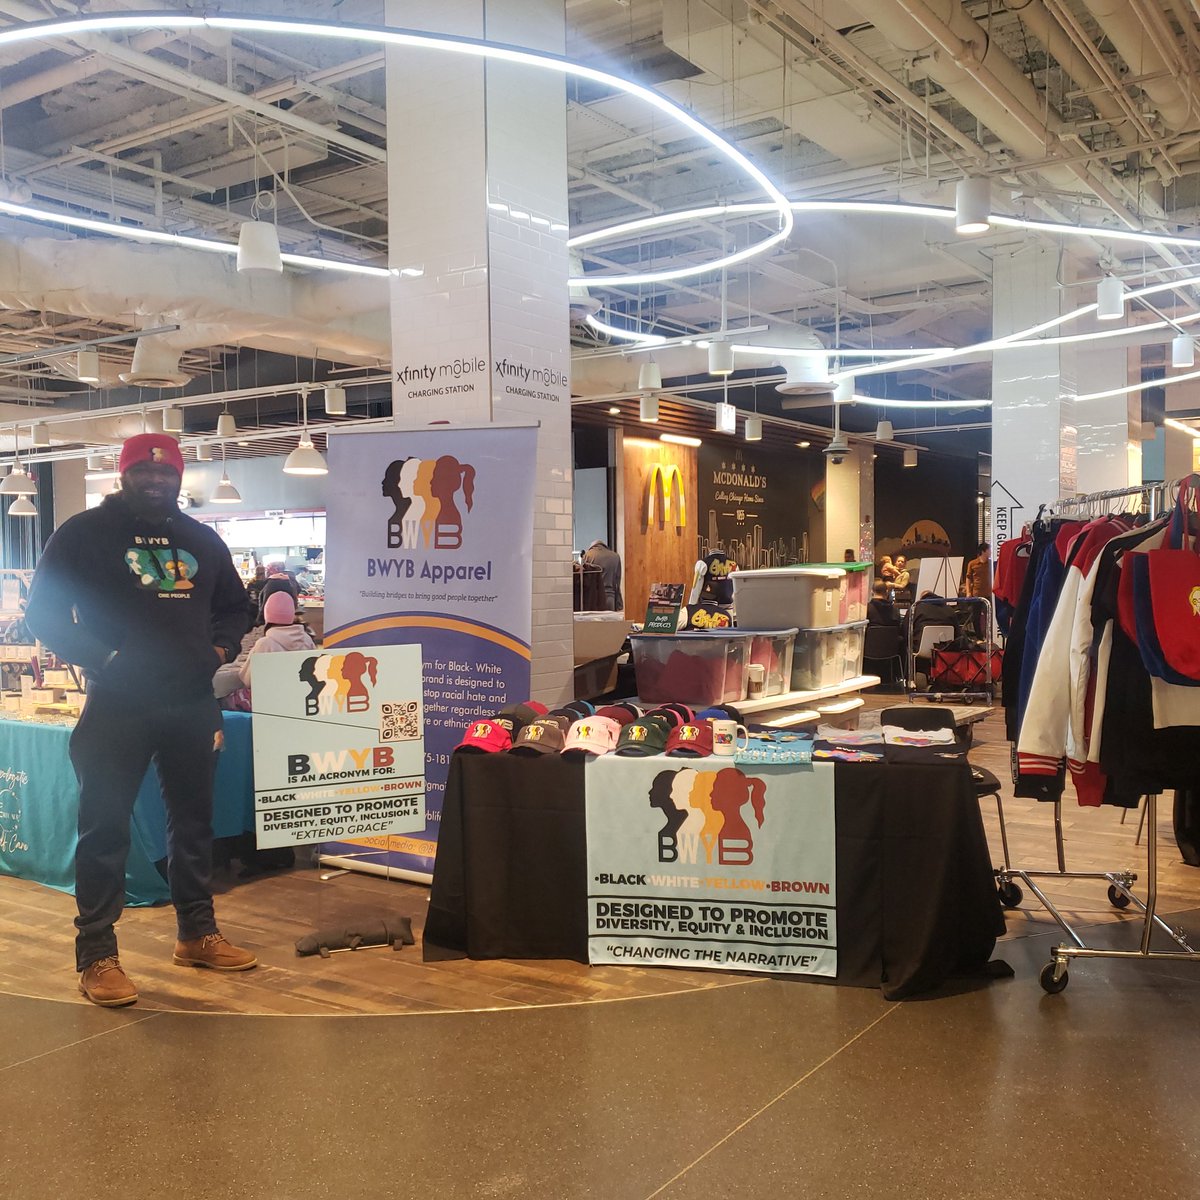 A 'BIG THANK YOU' to Navy Pier for hosting the first  'BLACK MAKERS MARKET' all of this month and a 'SPECIAL THANK YOU' to all the awesome people that came out to vibe and support the Market
 #BLACK #WHITE #YELLOW #BROWN 
#Weareonepeople #DEI #JUSTLOVE 
#BWYB #NAVYPIER #GOODVIBES